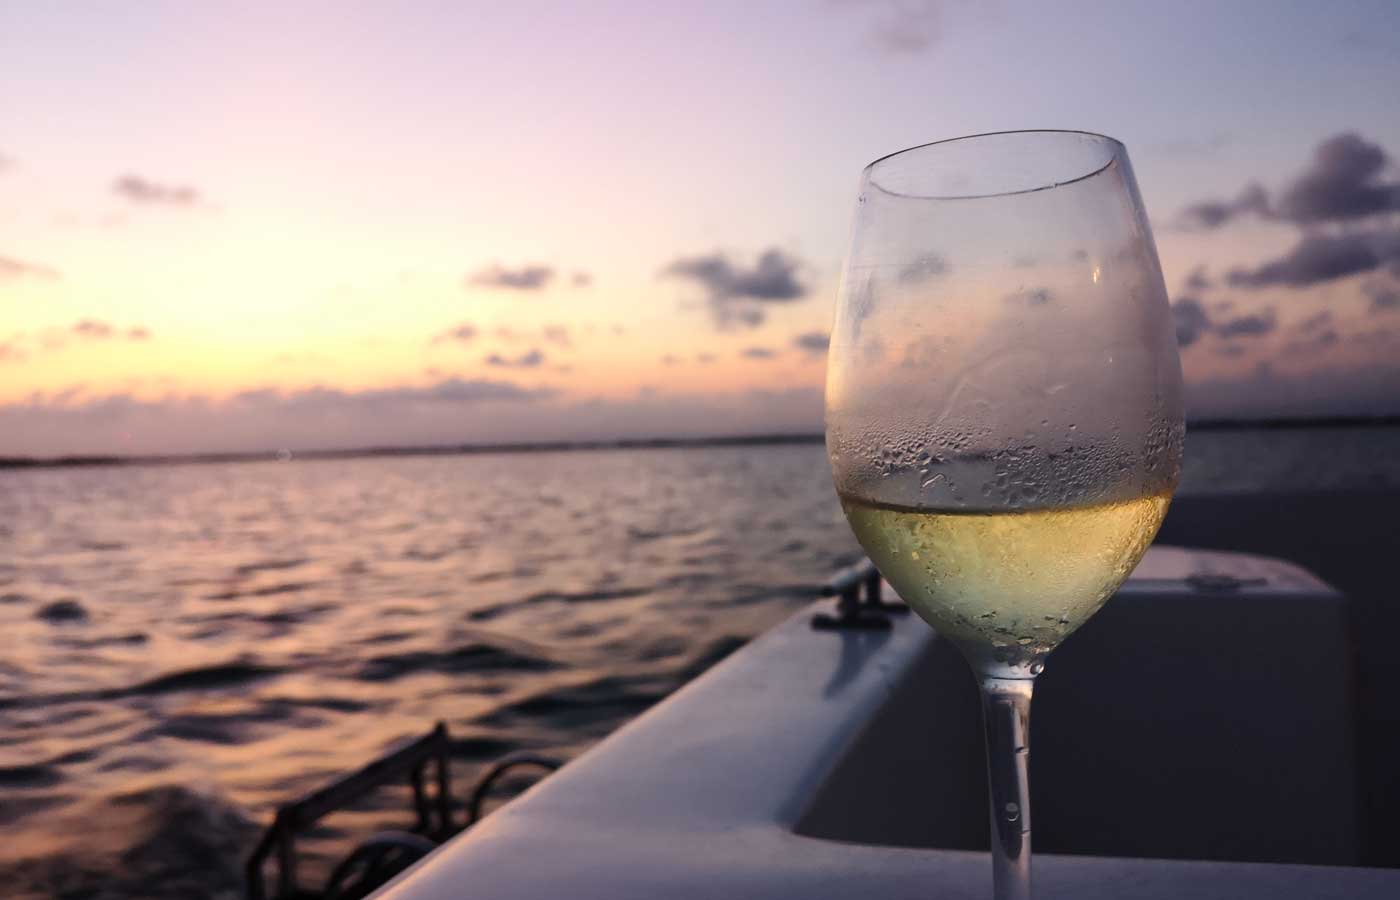 Sunset cruise in Placencia in Southern Belize